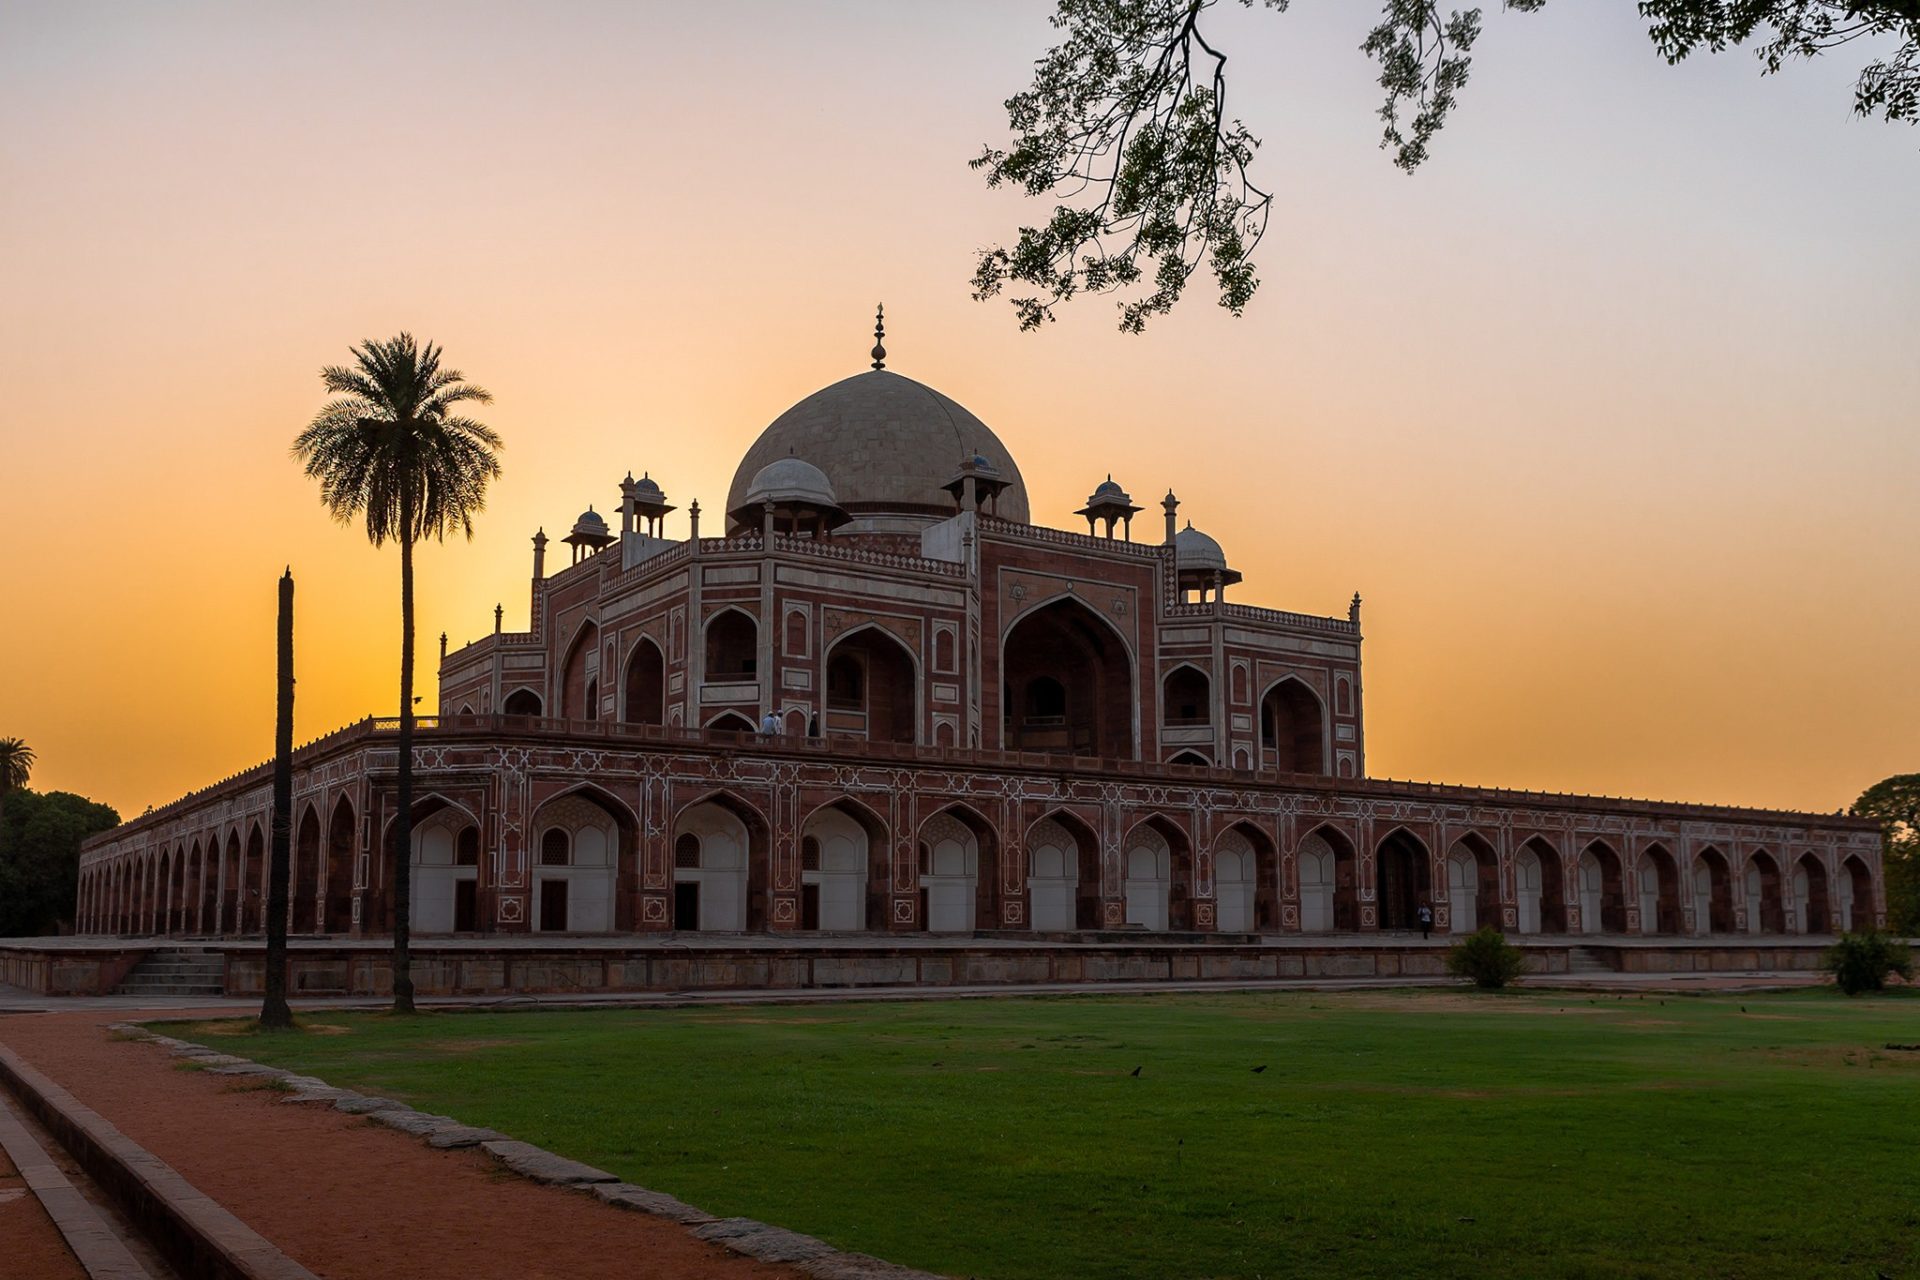 Sunday City Guide: What To Do in Delhi, India